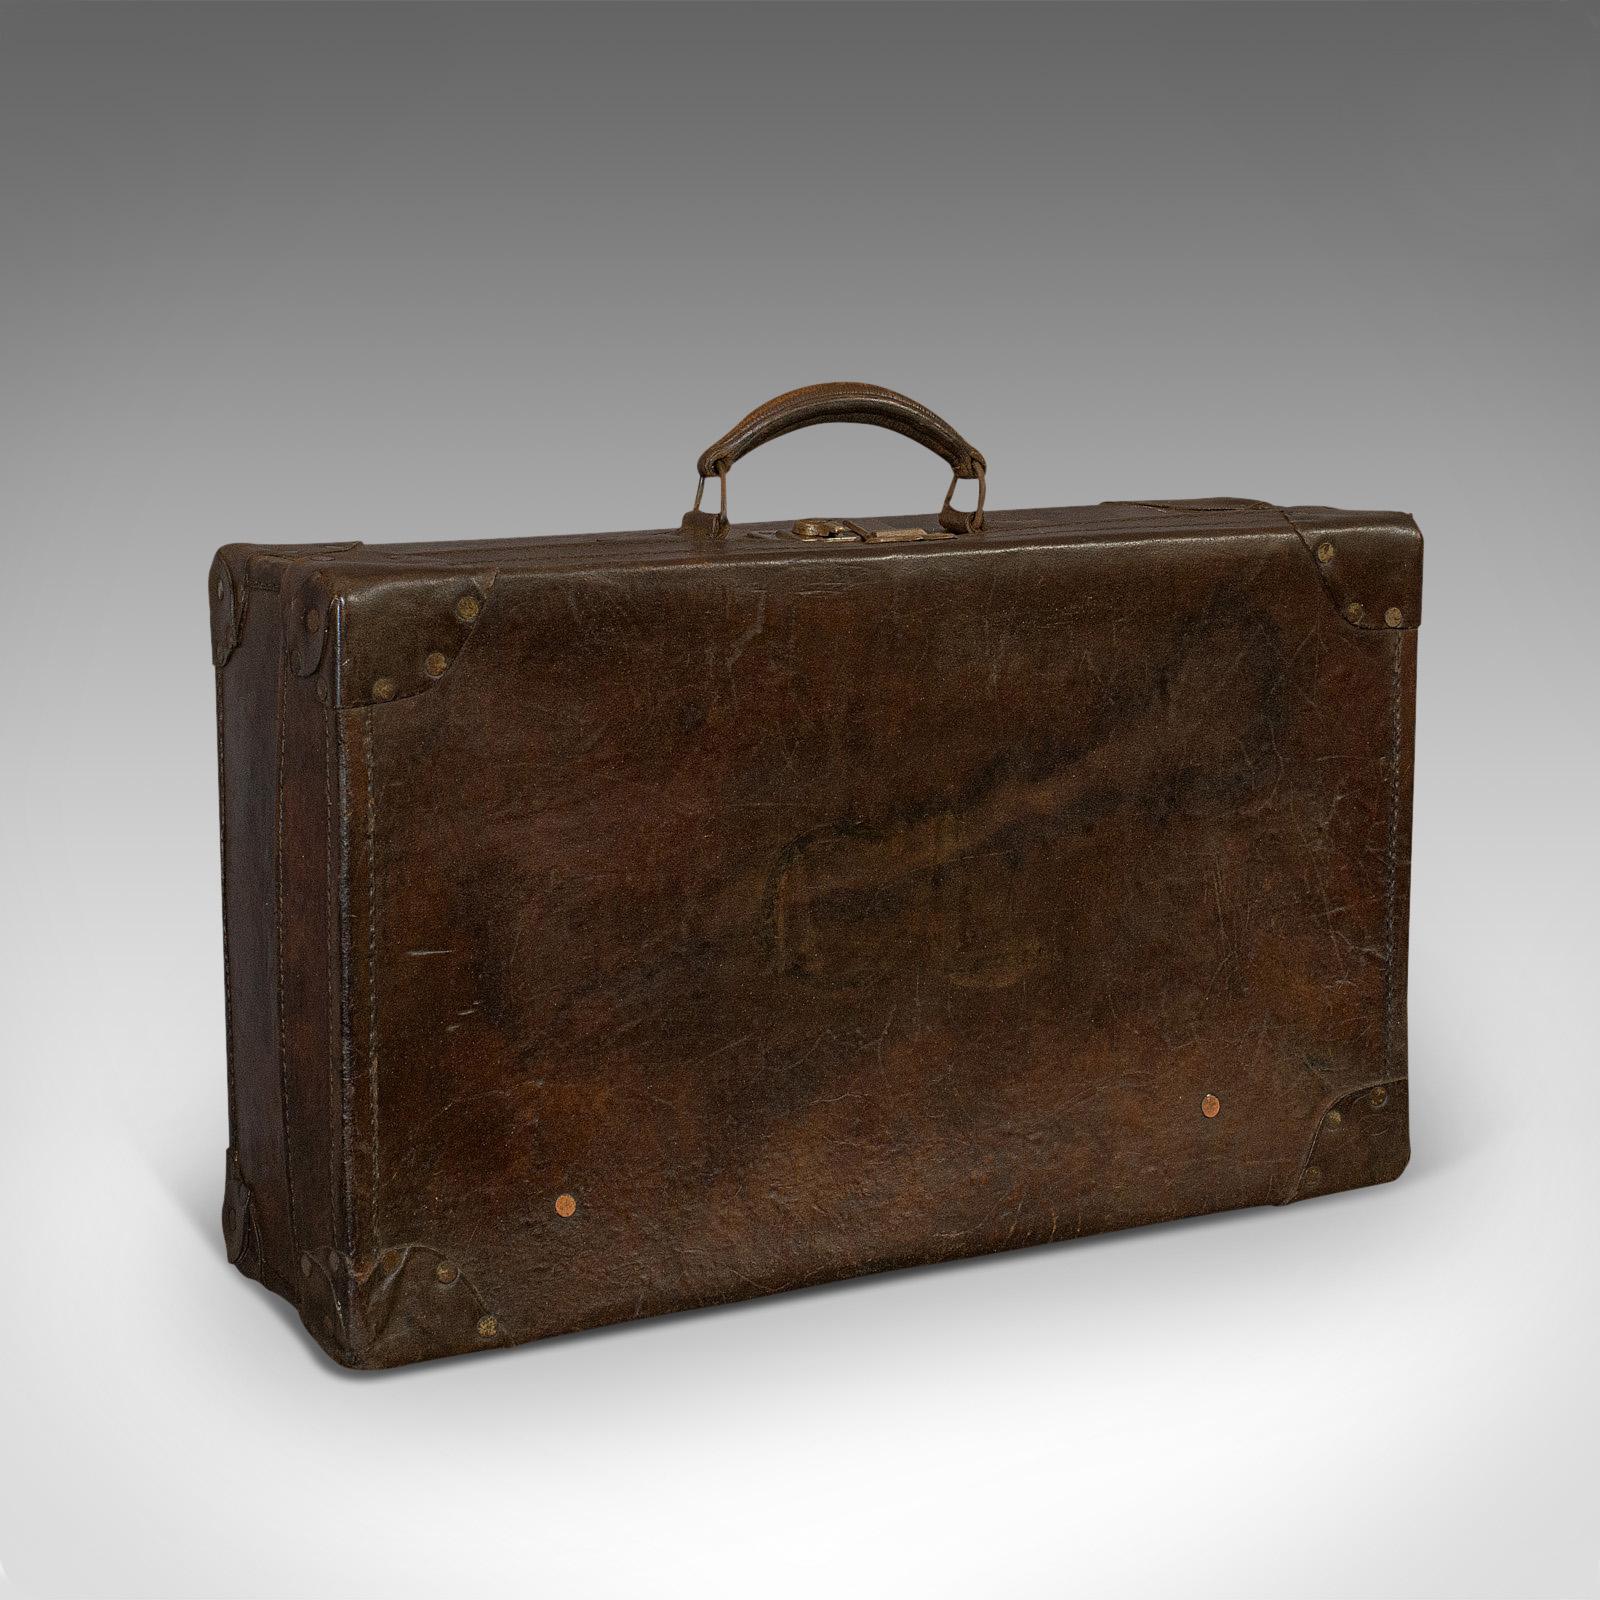 Antique Officer's Case, English, Leather, Travel, Suitcase, Luggage, circa 1920 2